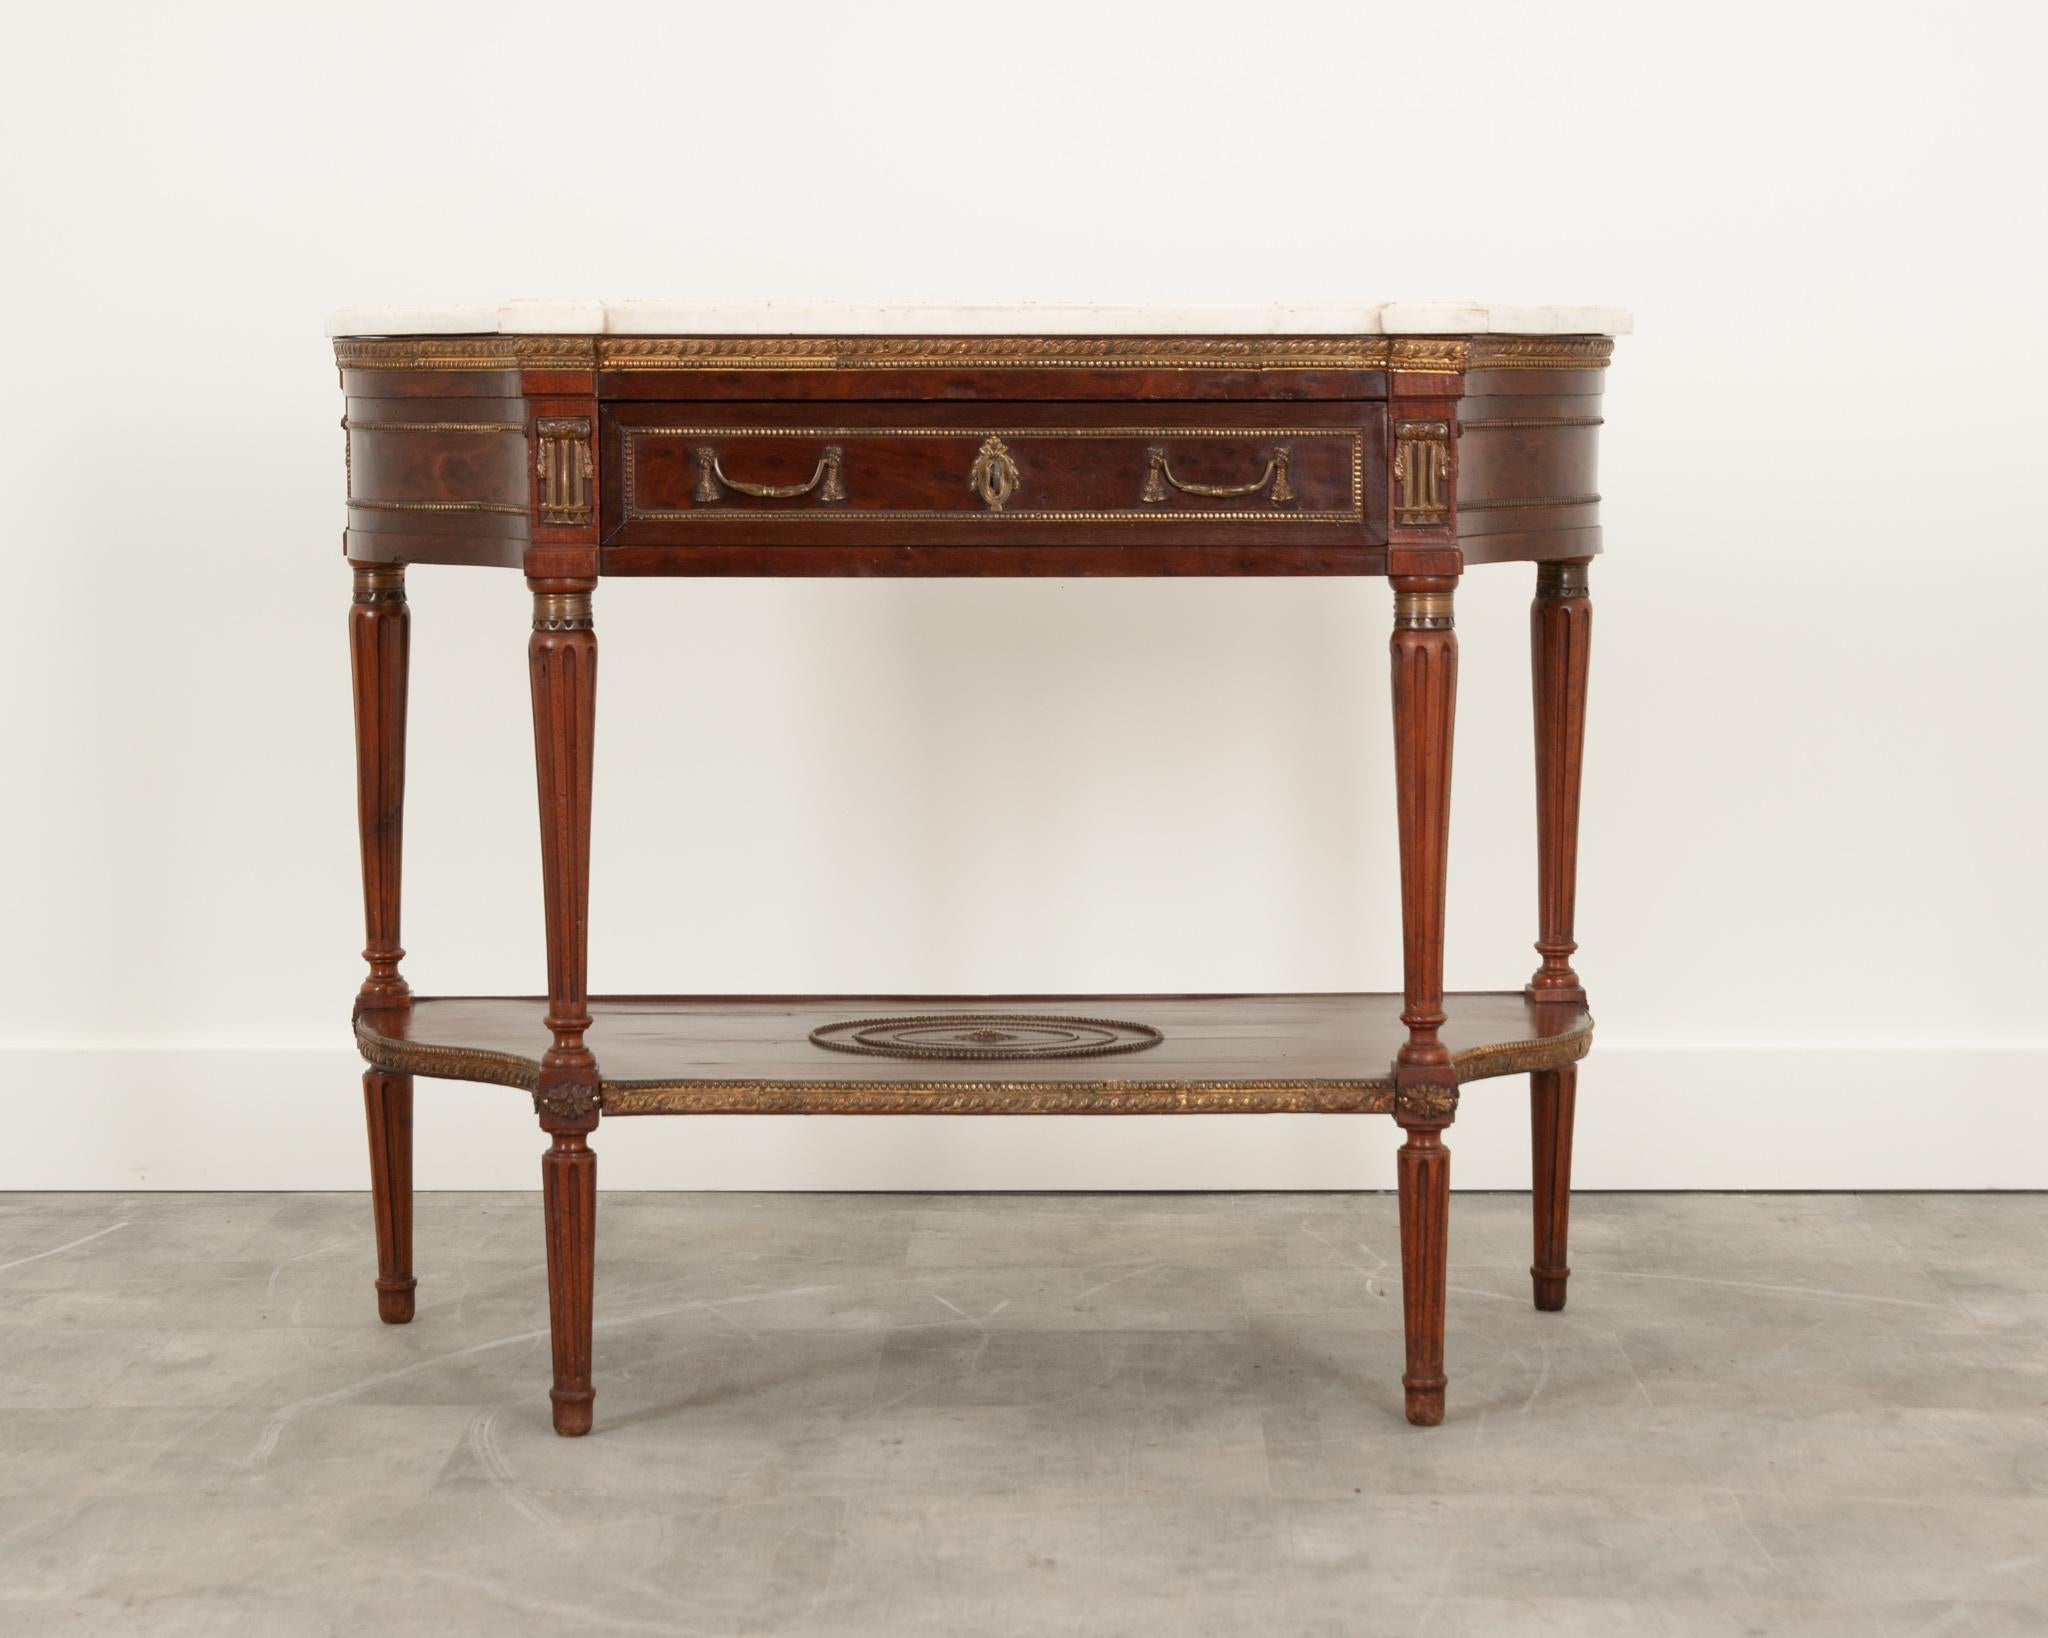 This handsome French console was crafted in the 19th century in the style of Louis XVI. The original, worn shaped white marble top has a molded edge and is removable. Some stains and scuffs are visible on the tops’ surface. The apron features